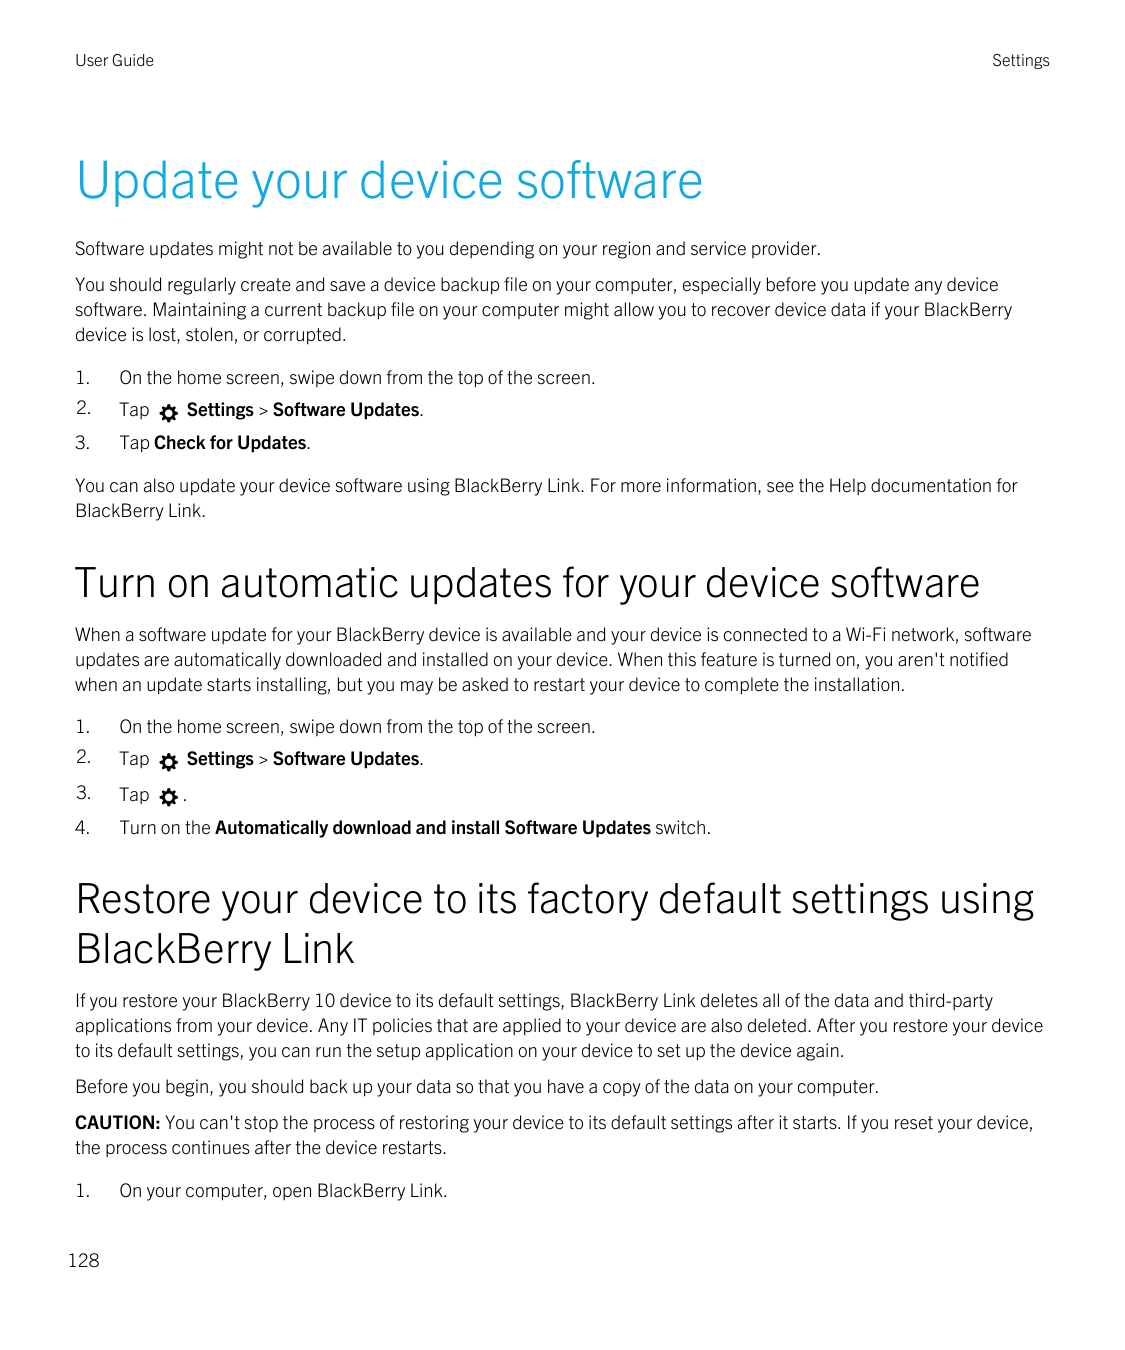 User GuideSettingsUpdate your device softwareSoftware updates might not be available to you depending on your region and service